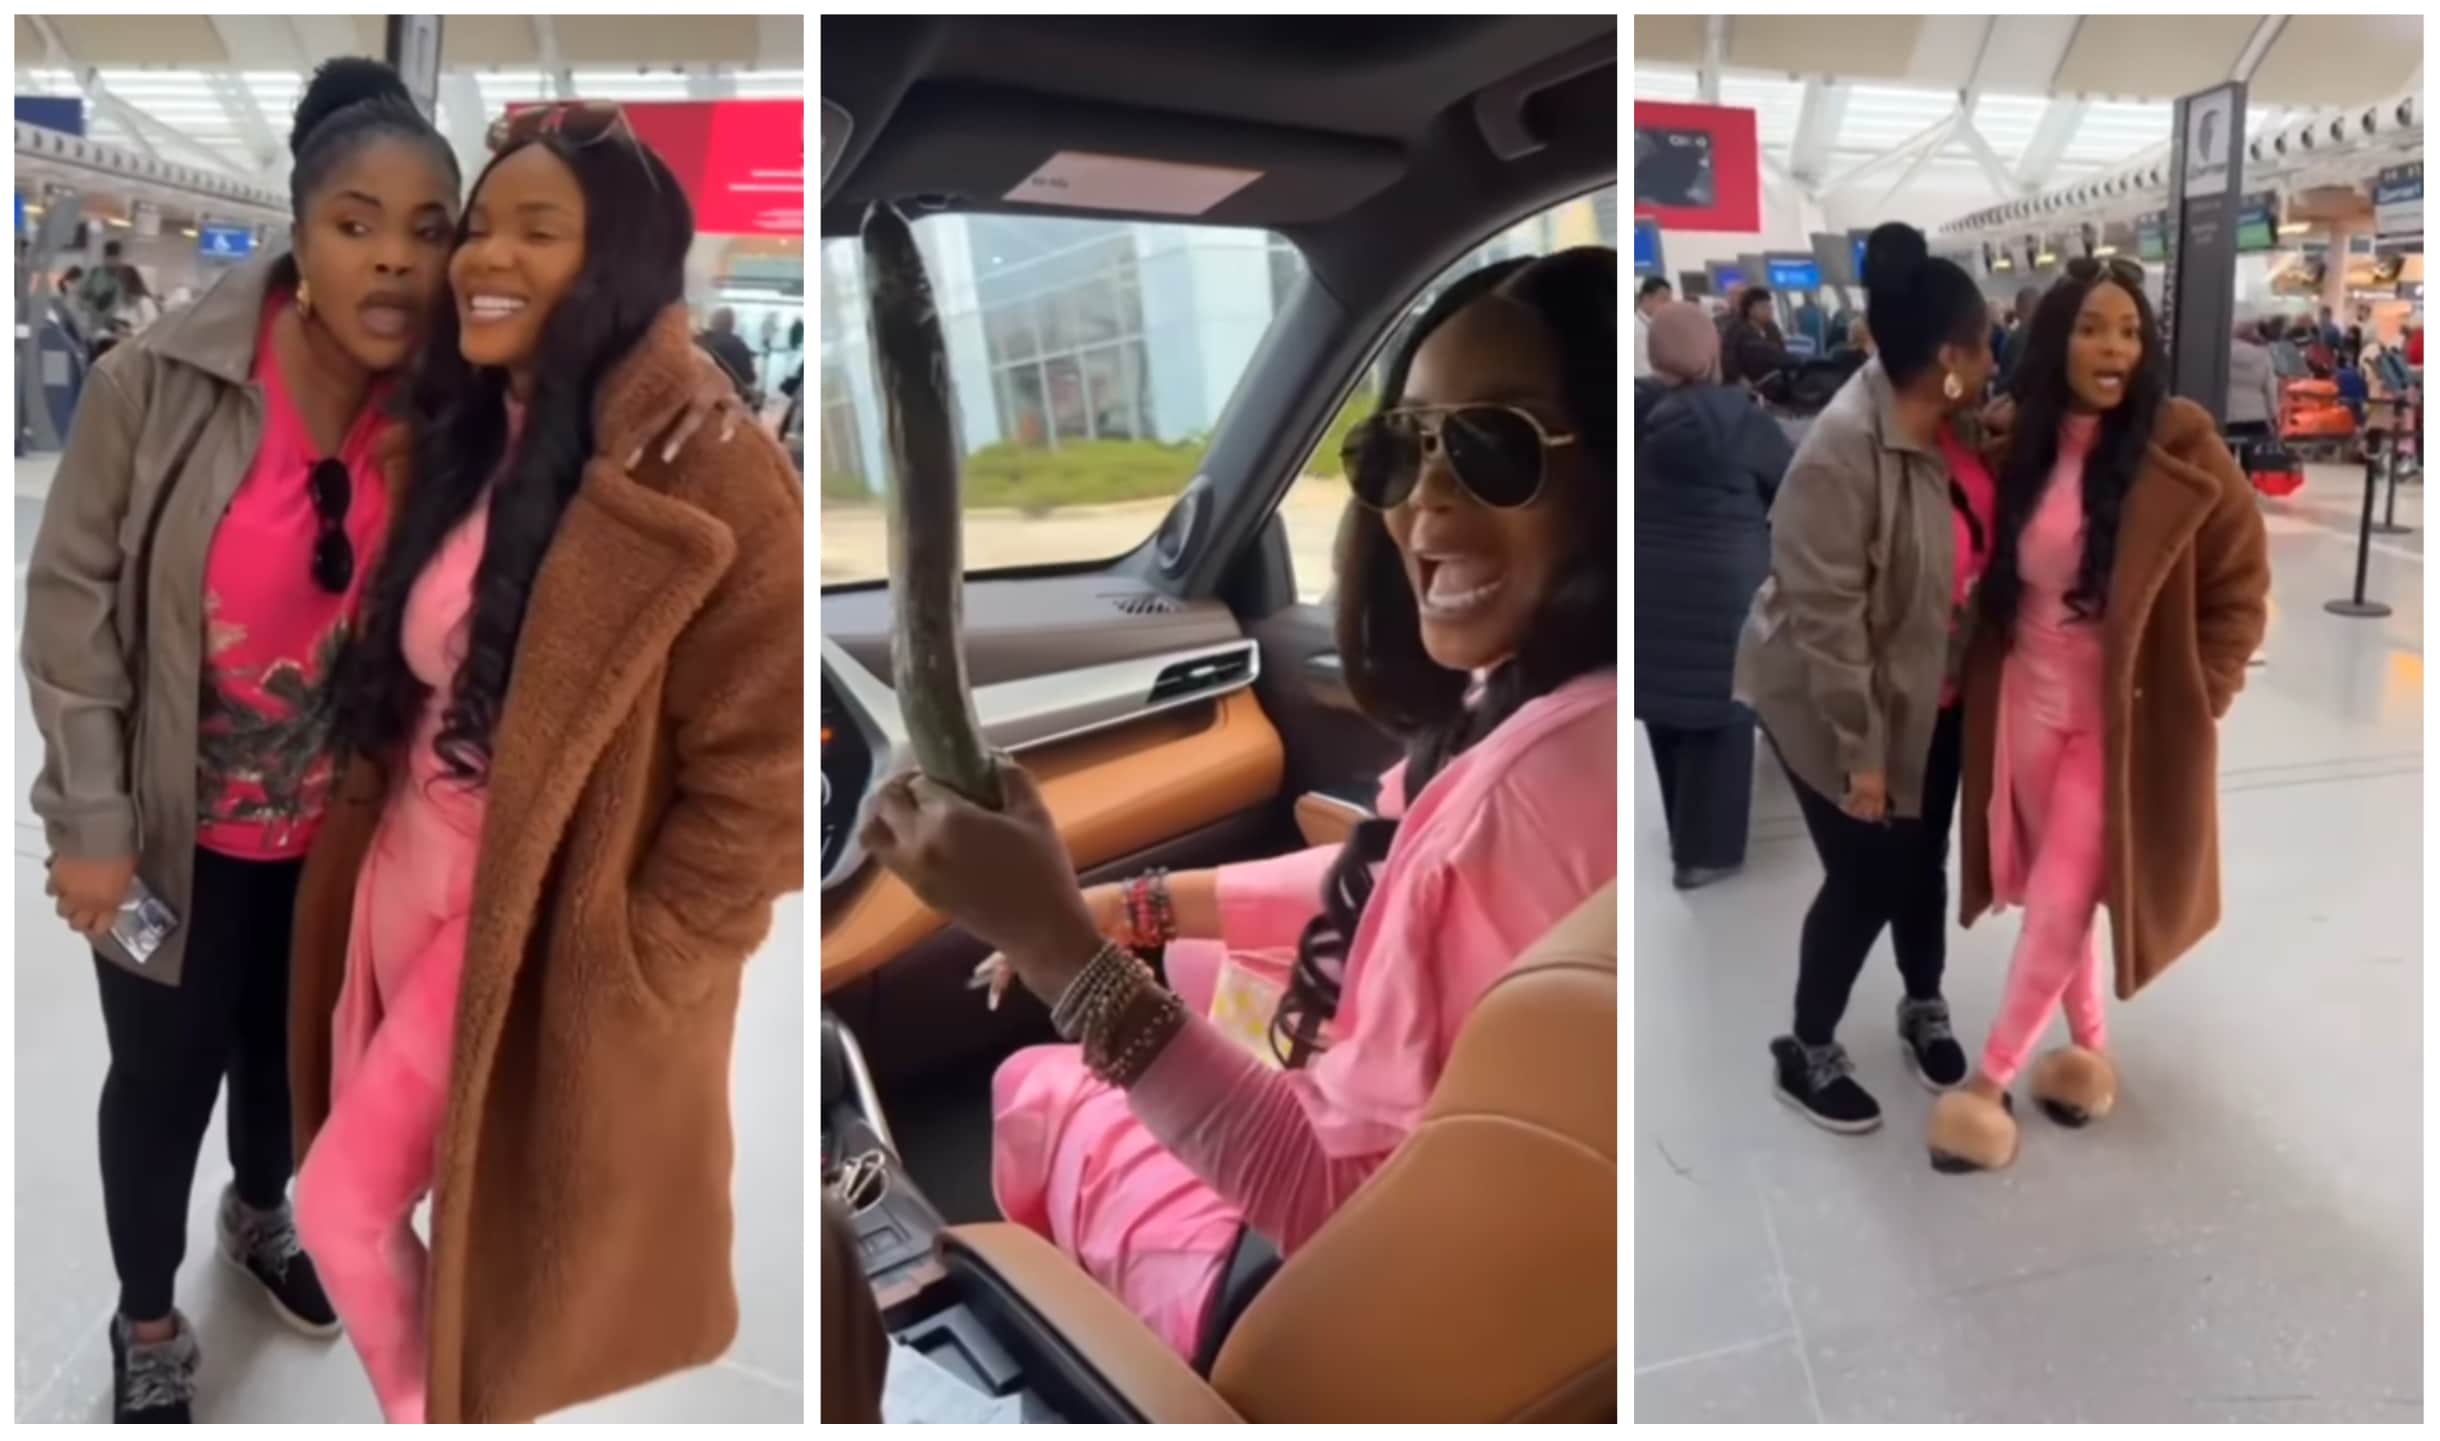 “You have overused it”- Actress Iyabo Ojo discovers a adult toy in colleague Lola Alao’s car